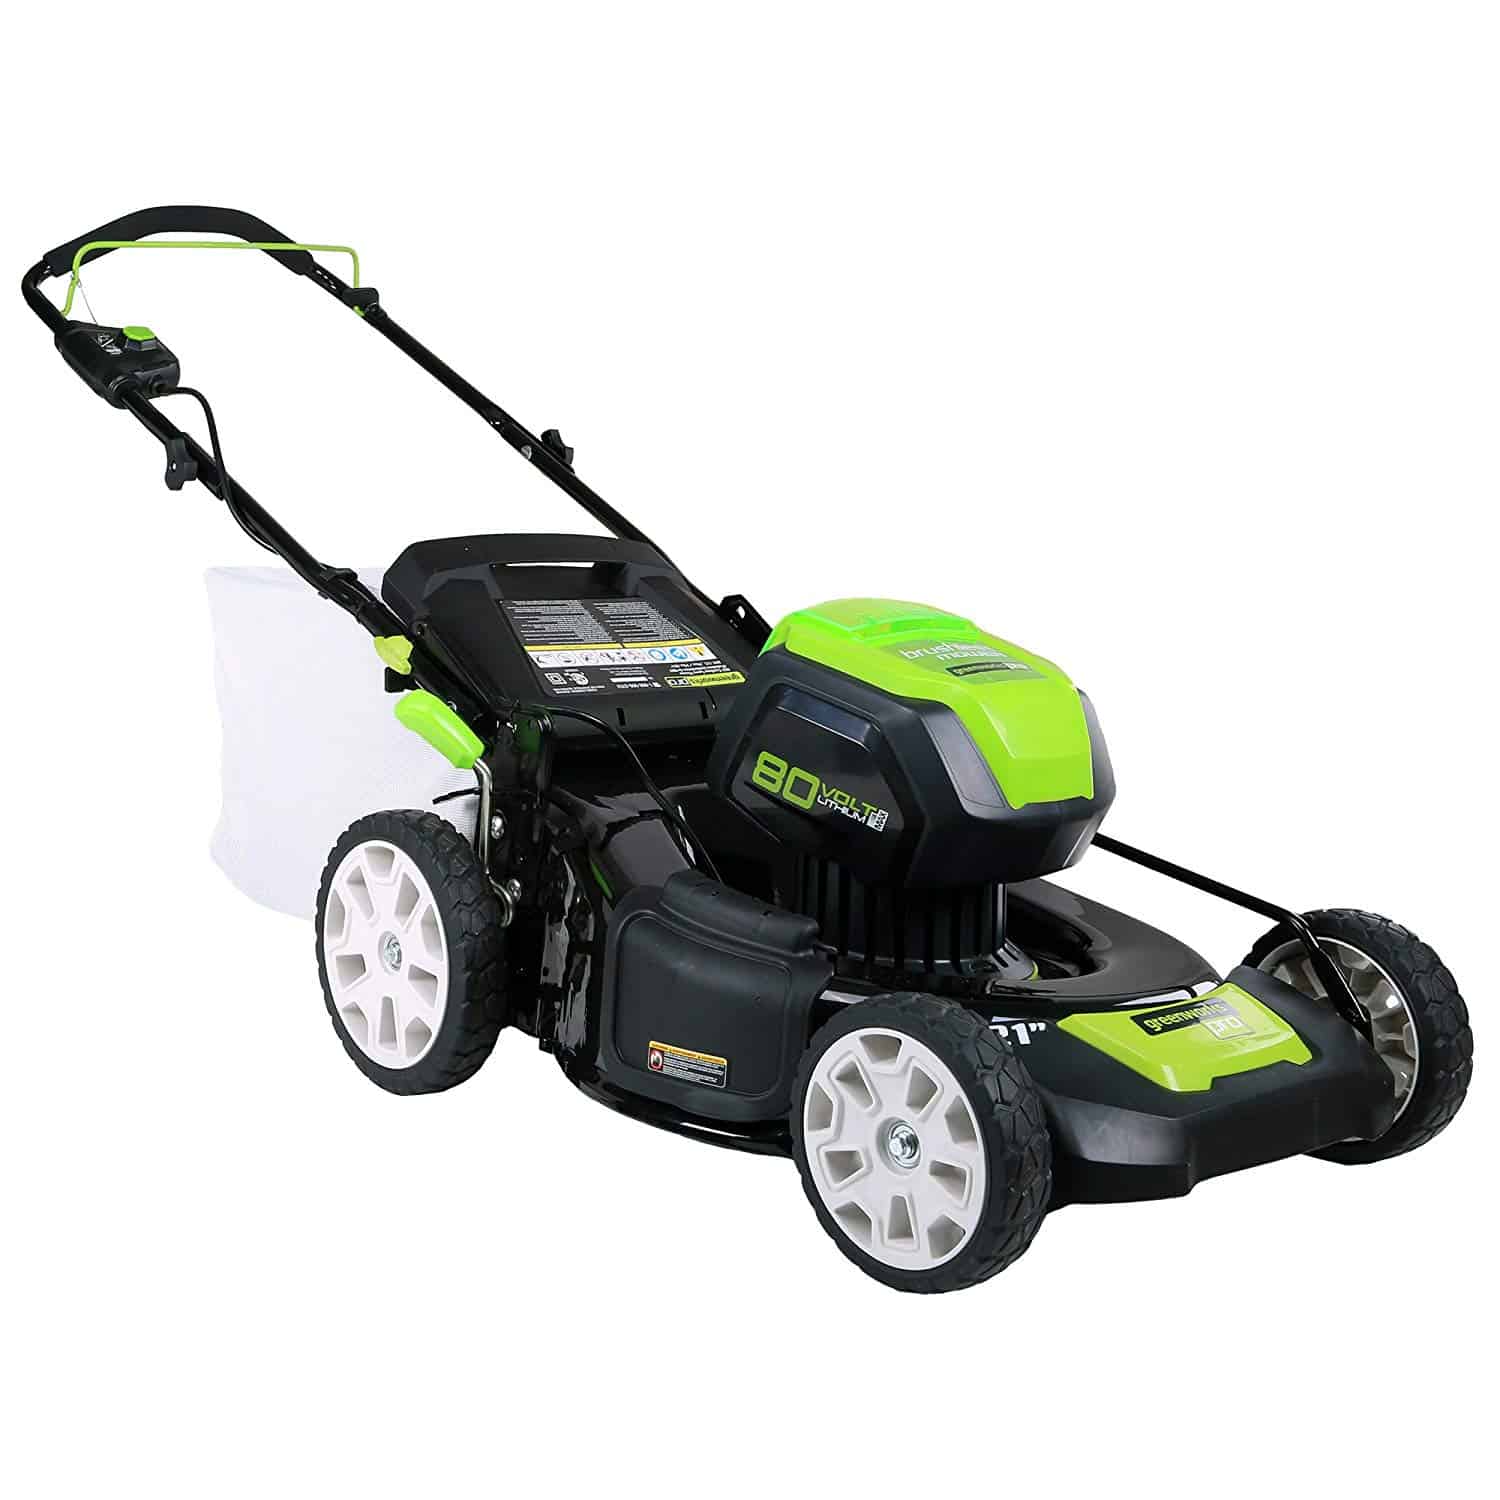 The Pros and Cons of Greenworks 80V Lawn Mowers